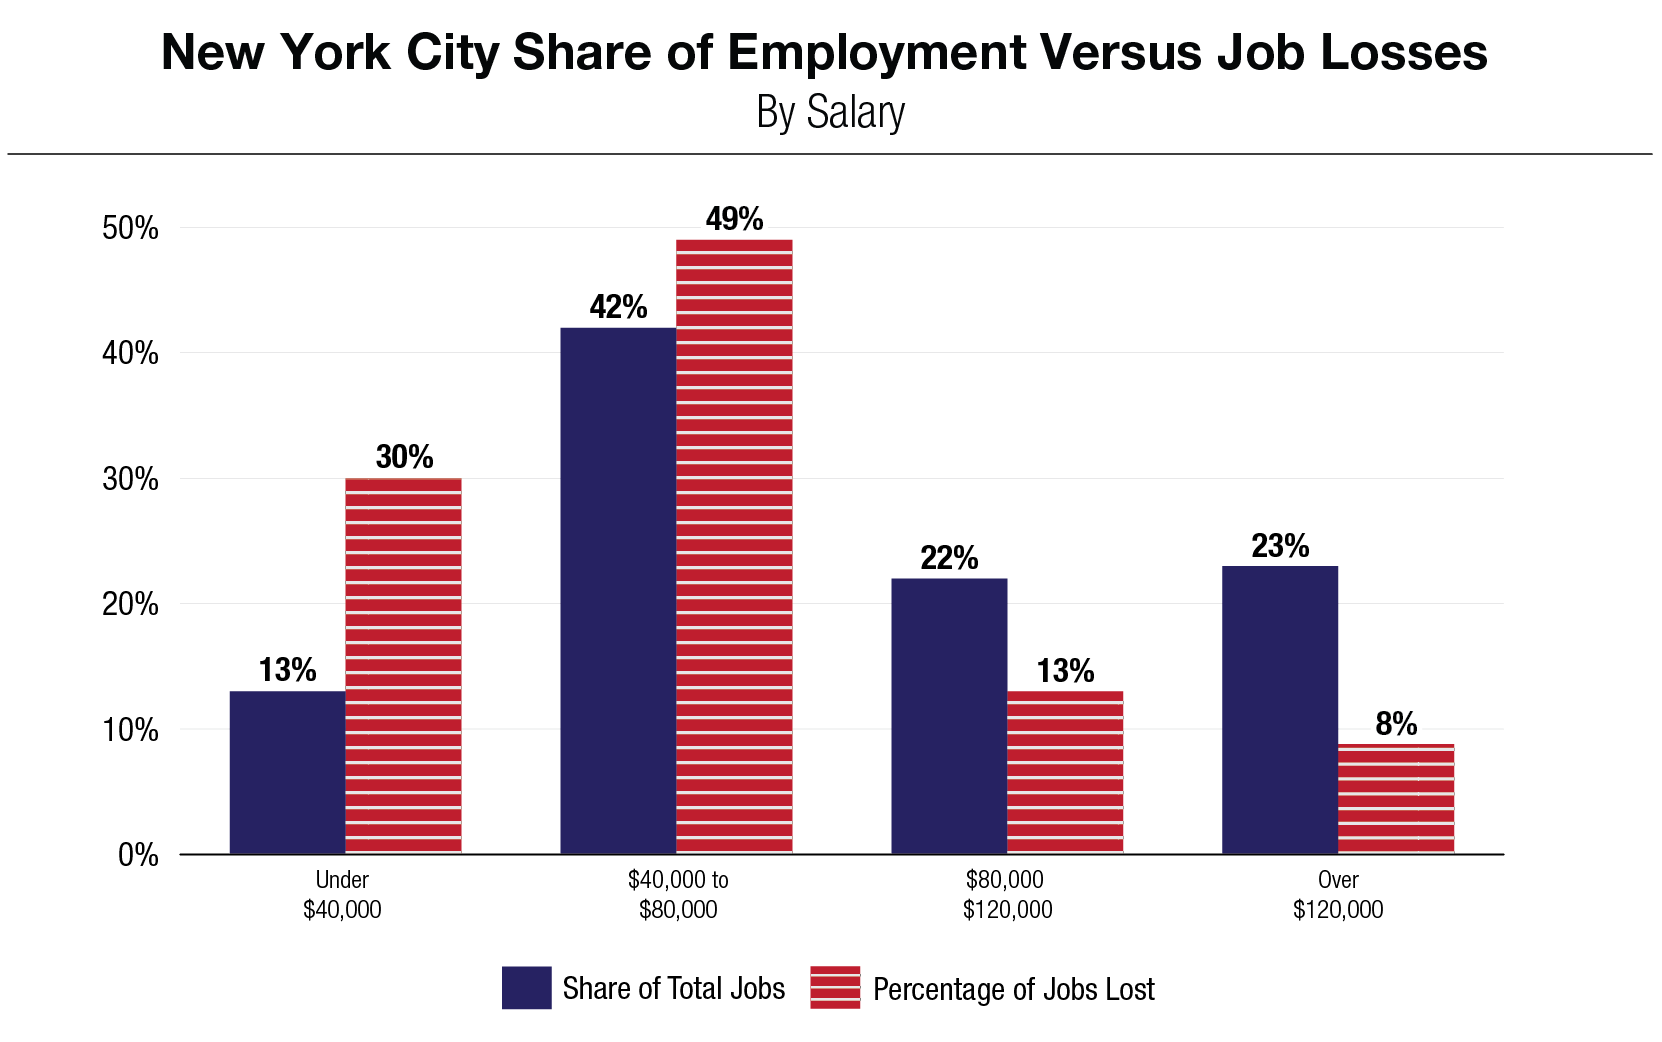 Bar Chart: New York City Share of Employment Versus Job Losses, By Salary